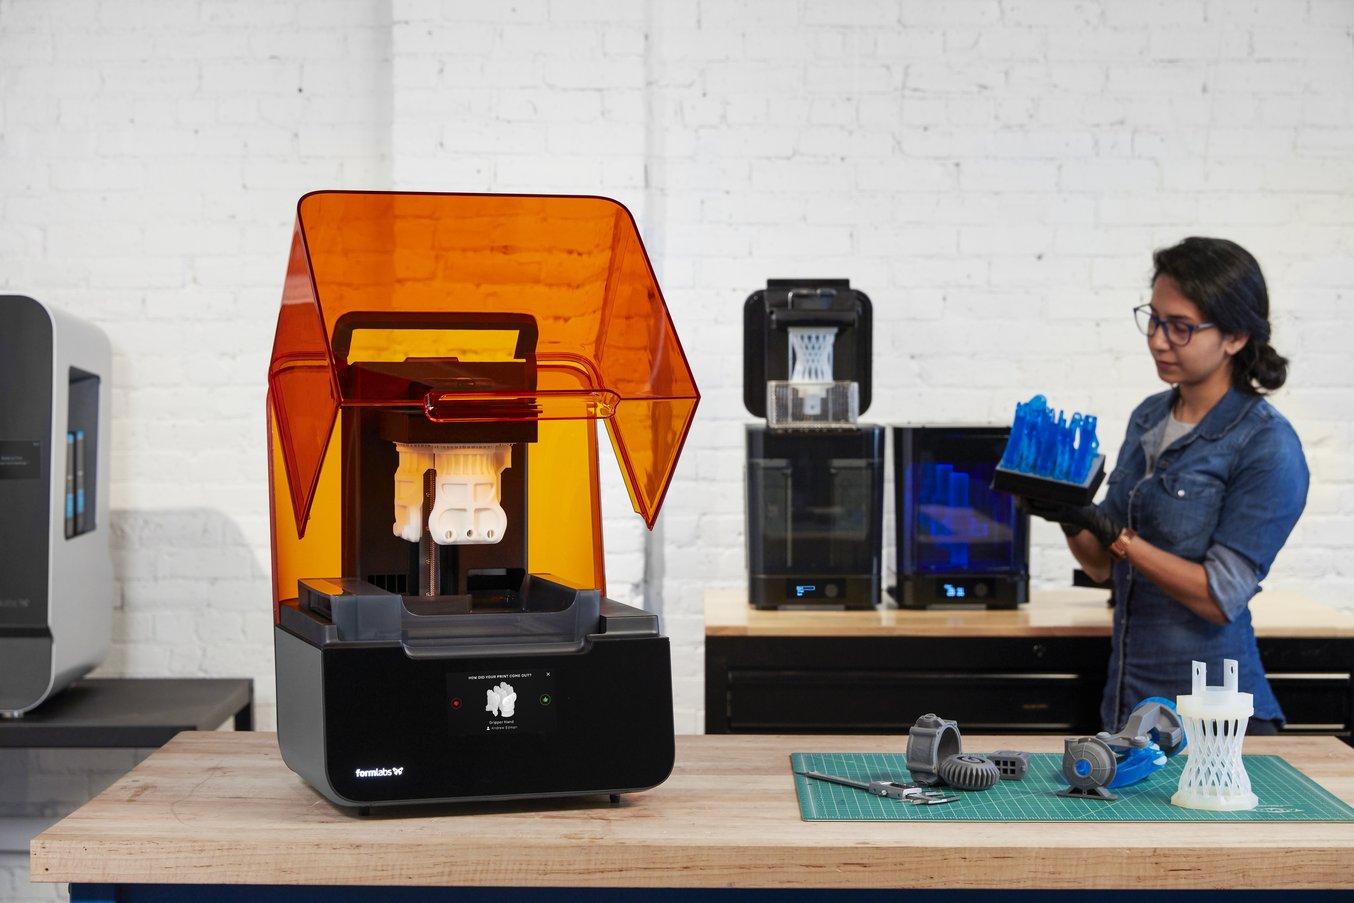 ANYCUBIC wash & cure machine: Streamline your resin 3d printing workflow 